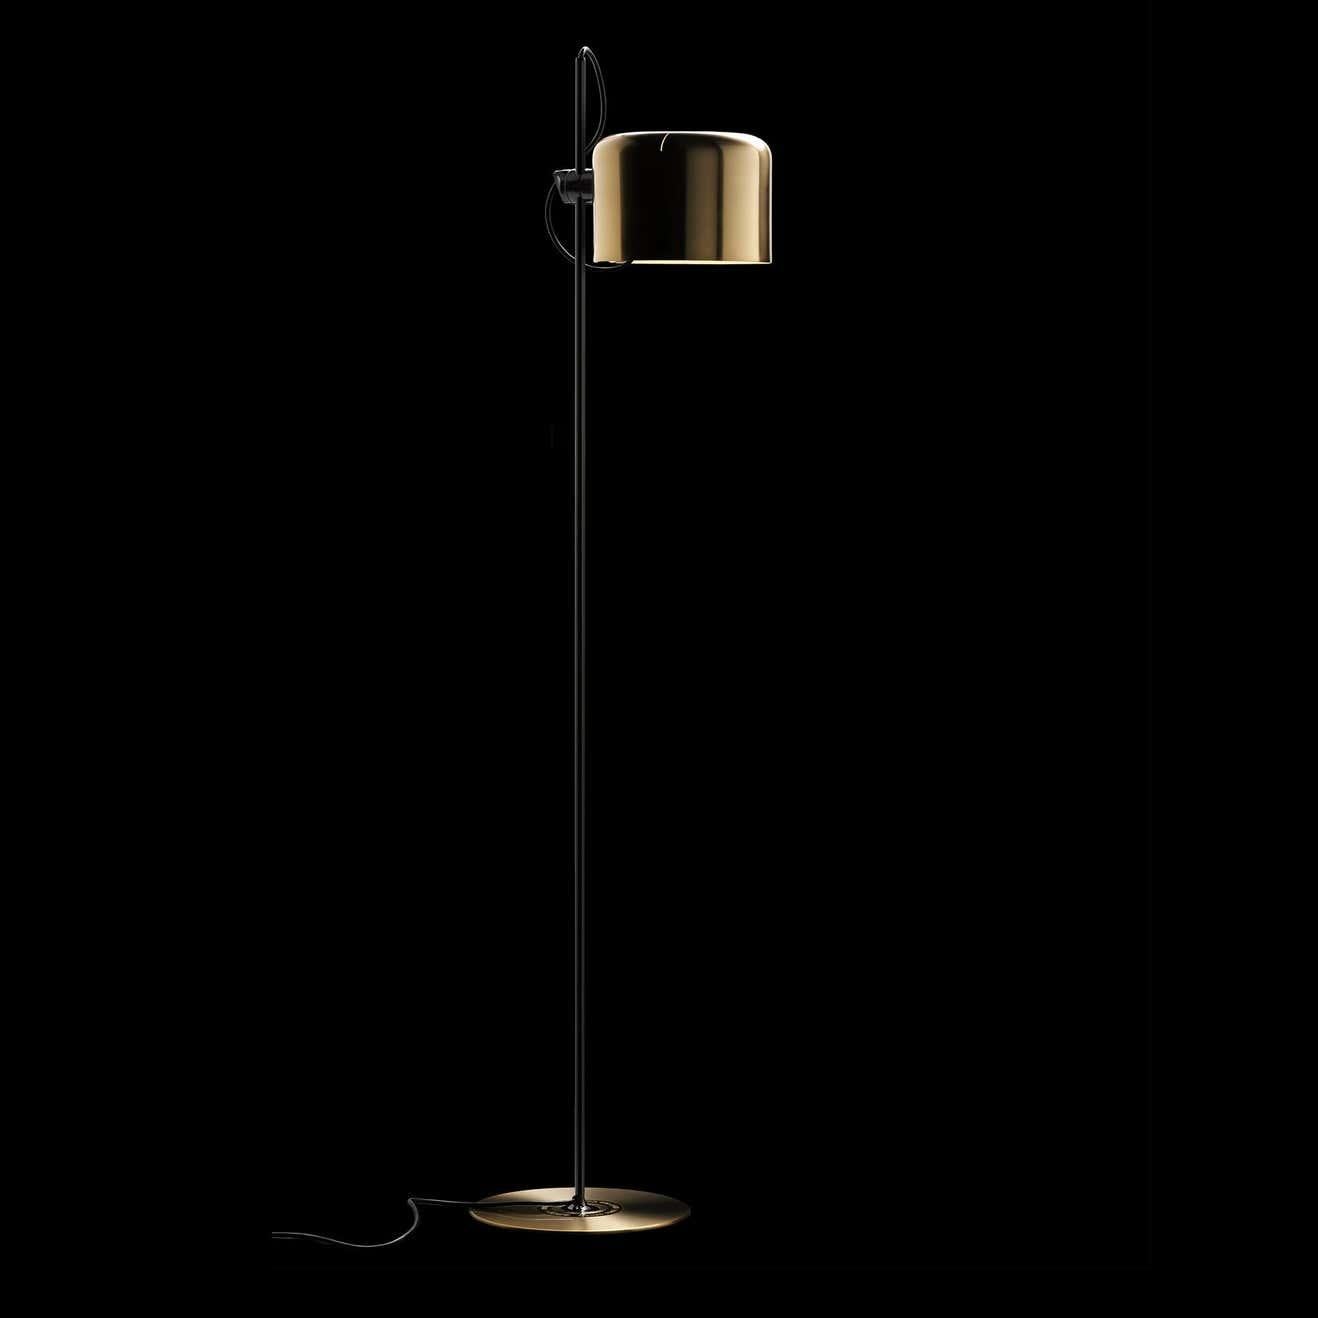 Metal Joe Colombo Floor Lamp Limited Edition 'Coupé' Gold by Oluce For Sale